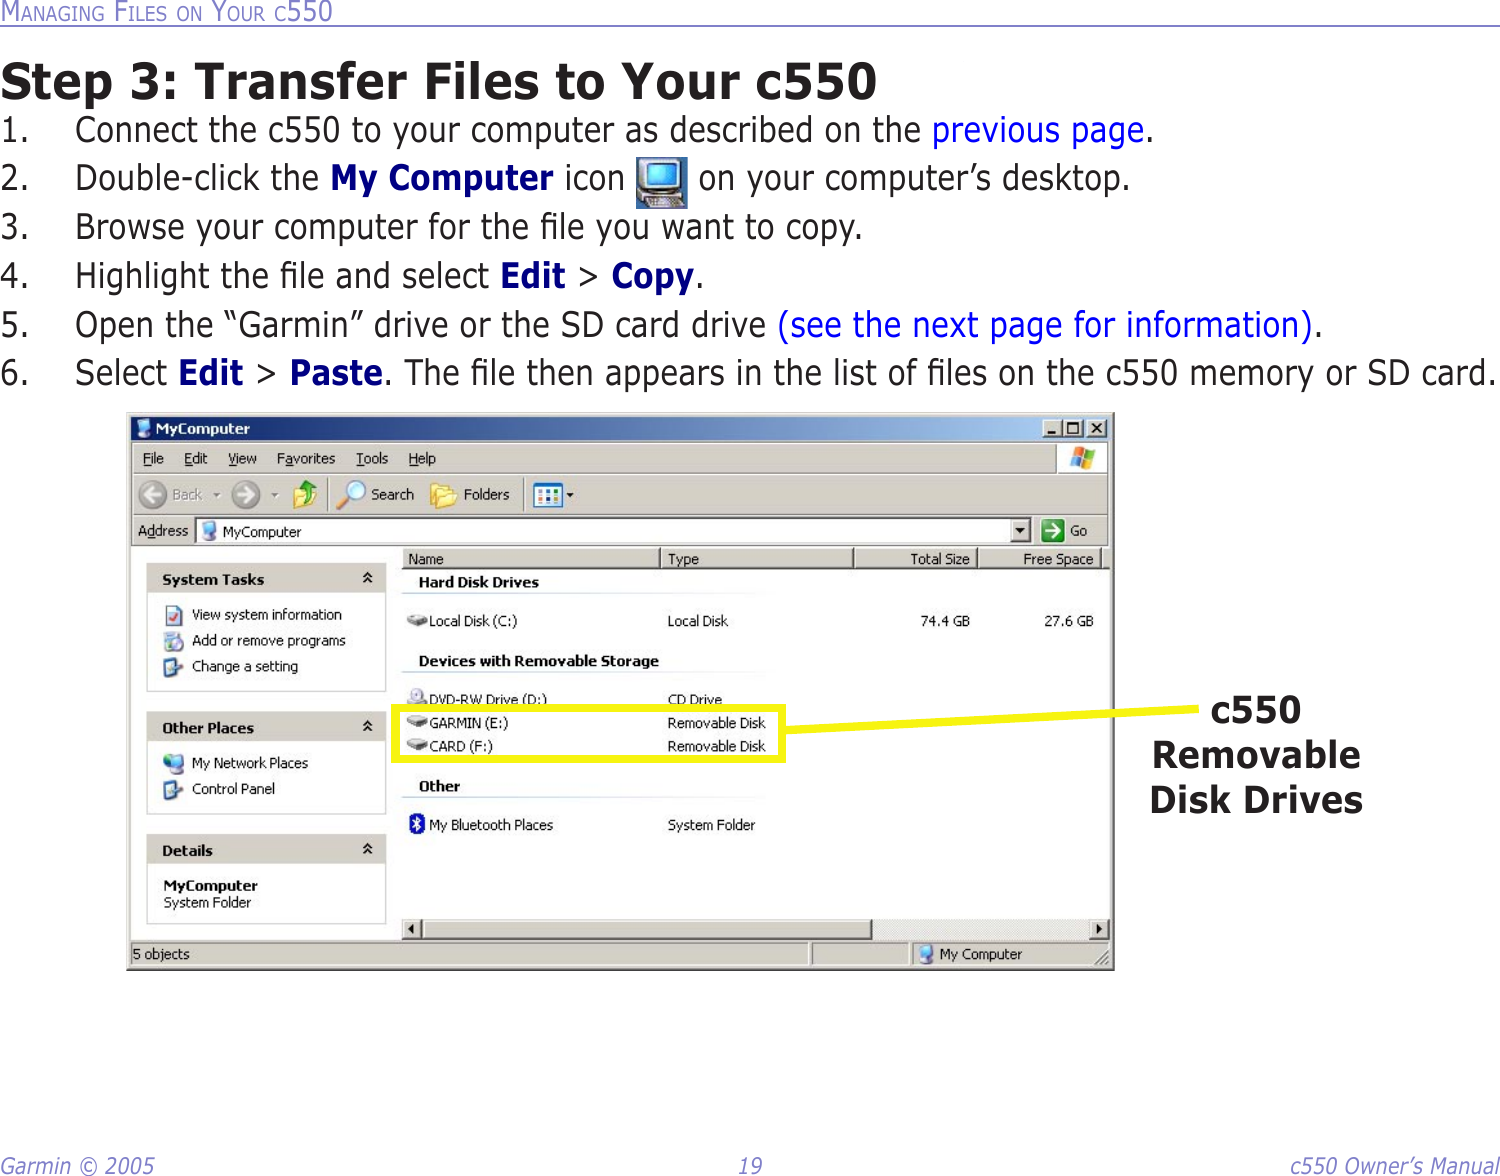 Garmin © 2005  19  c550 Owner’s ManualMANAGING FILES ON YOUR C550Step 3: Transfer Files to Your c5501.  Connect the c550 to your computer as described on the previous page. 2.  Double-click the My Computer icon   on your computer’s desktop. 3.  Browse your computer for the ﬁle you want to copy. 4.  Highlight the ﬁle and select Edit &gt; Copy. 5.  Open the “Garmin” drive or the SD card drive (see the next page for information).6.  Select Edit &gt; Paste. The ﬁle then appears in the list of ﬁles on the c550 memory or SD card. c550 Removable Disk Drives